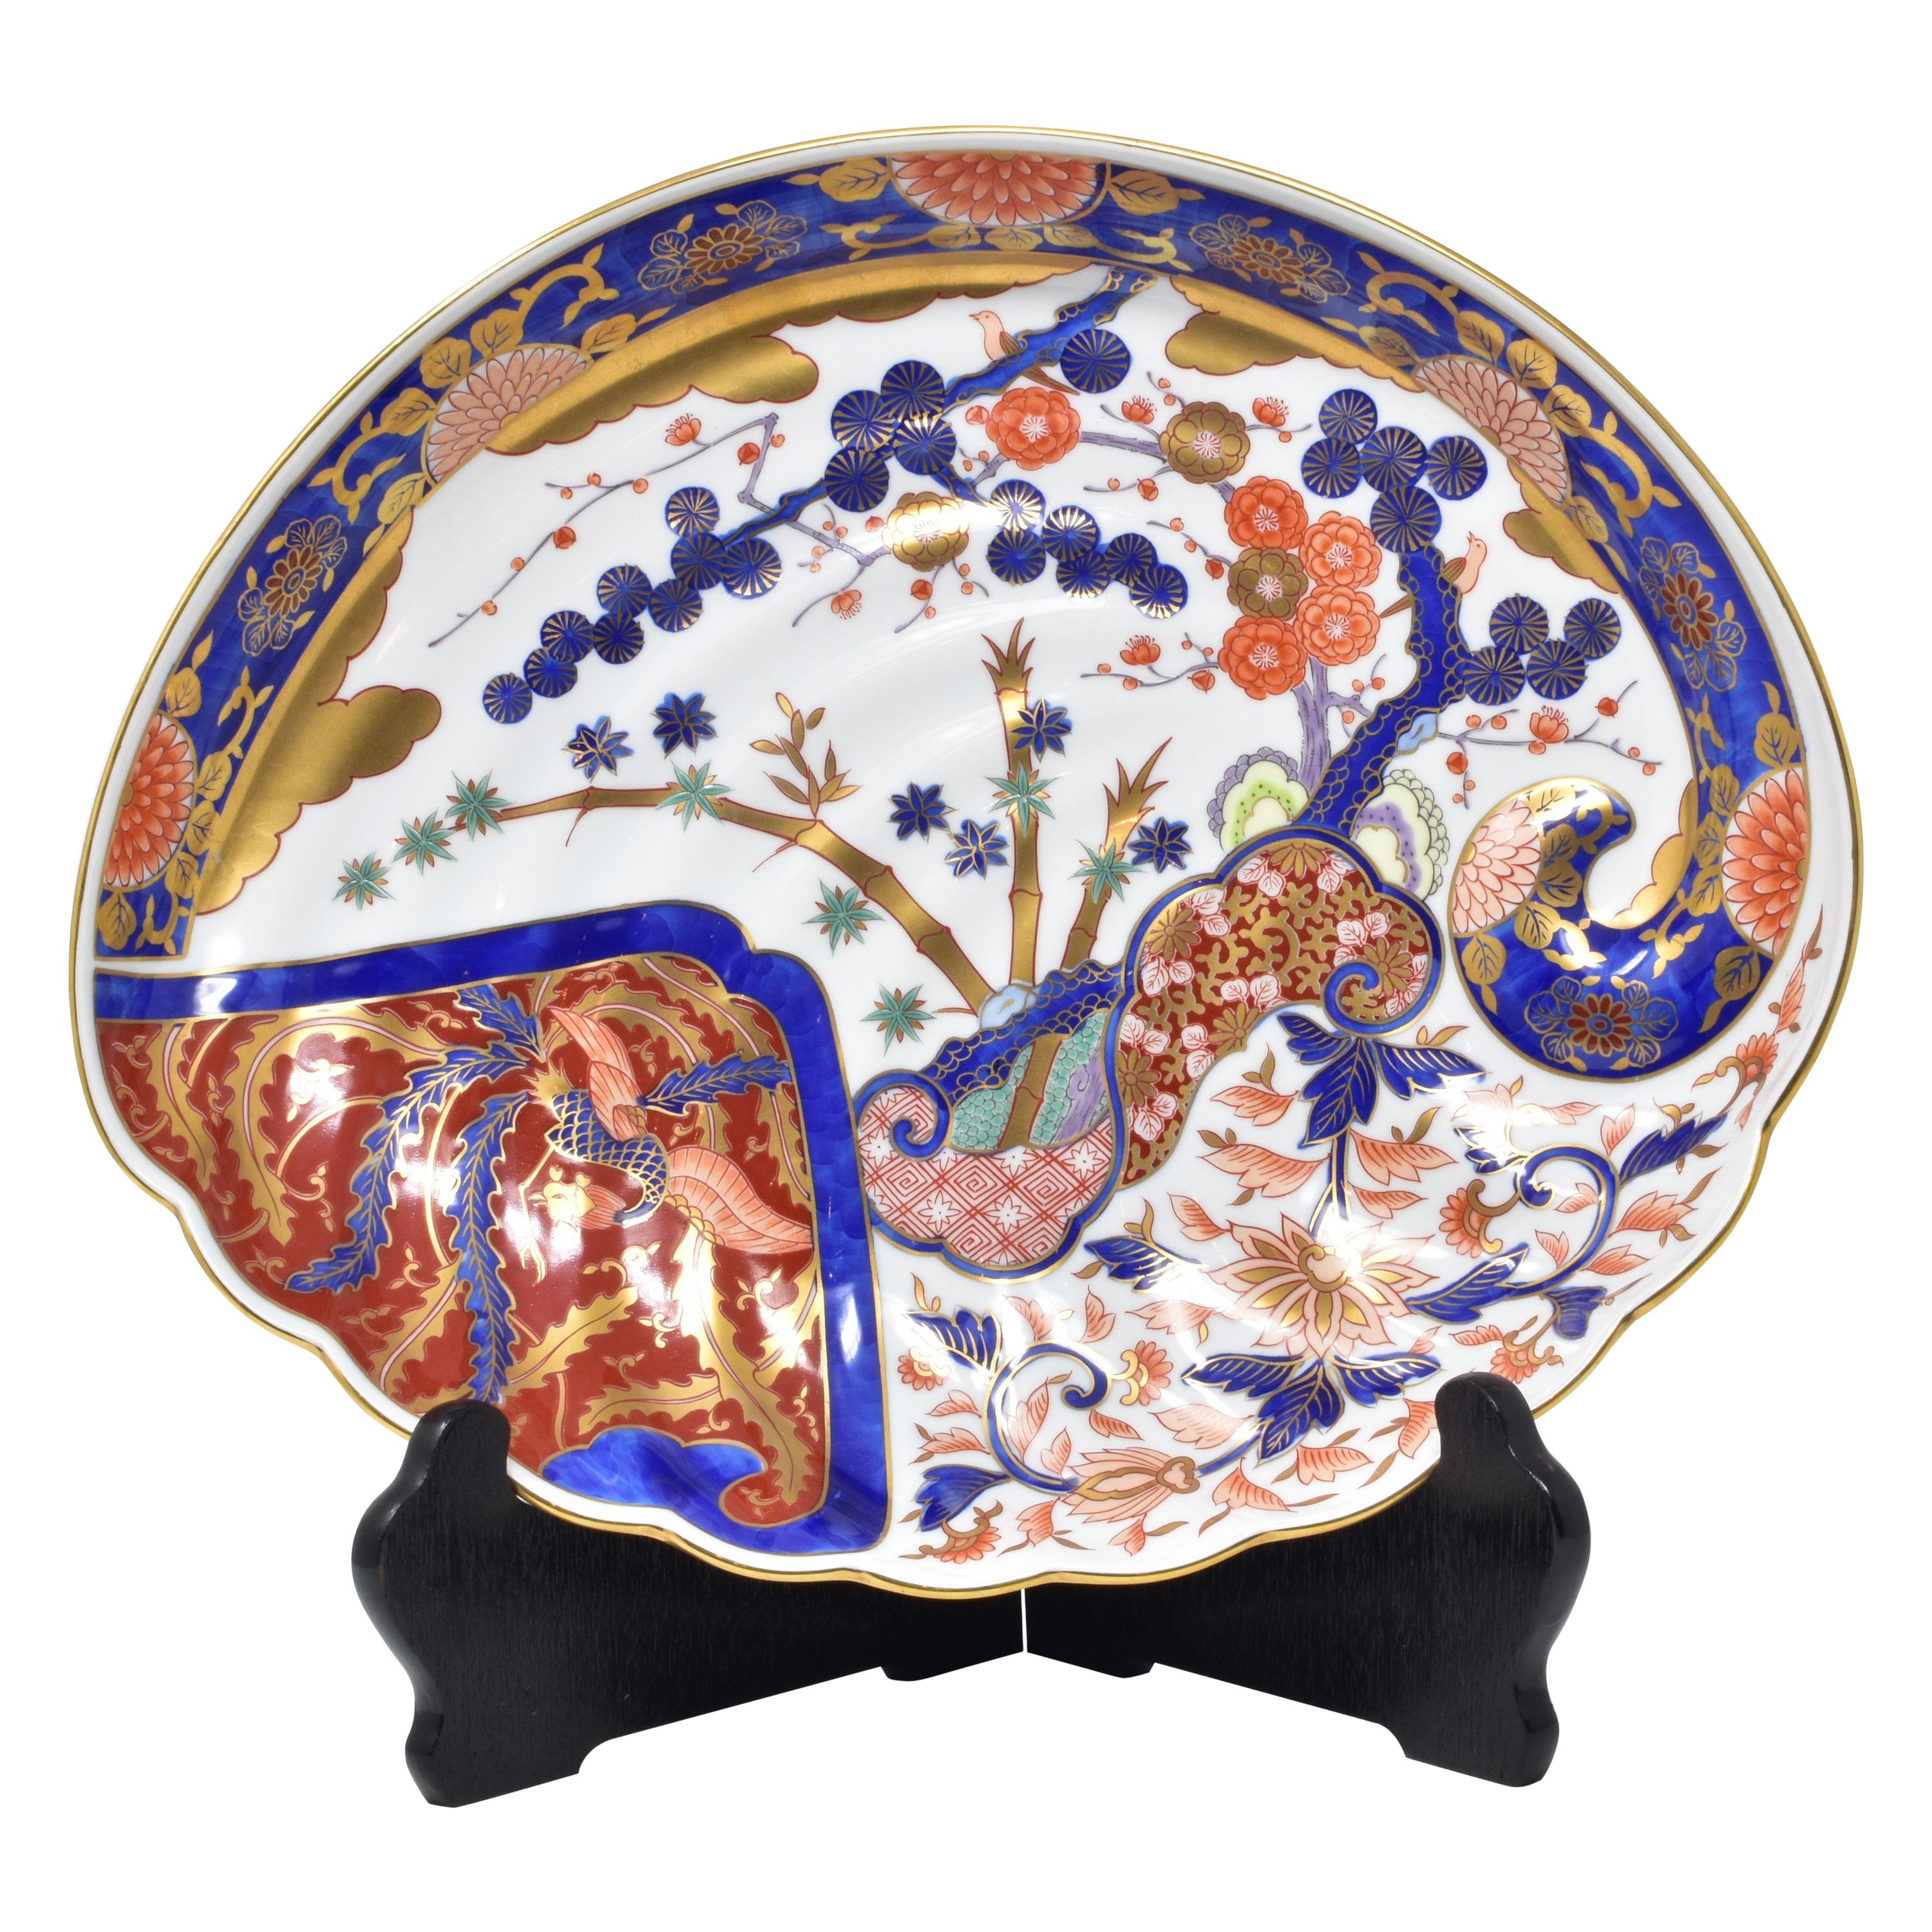 Contemporary Japanese Gilded Imari Blue Red Decorative Porcelain Charger